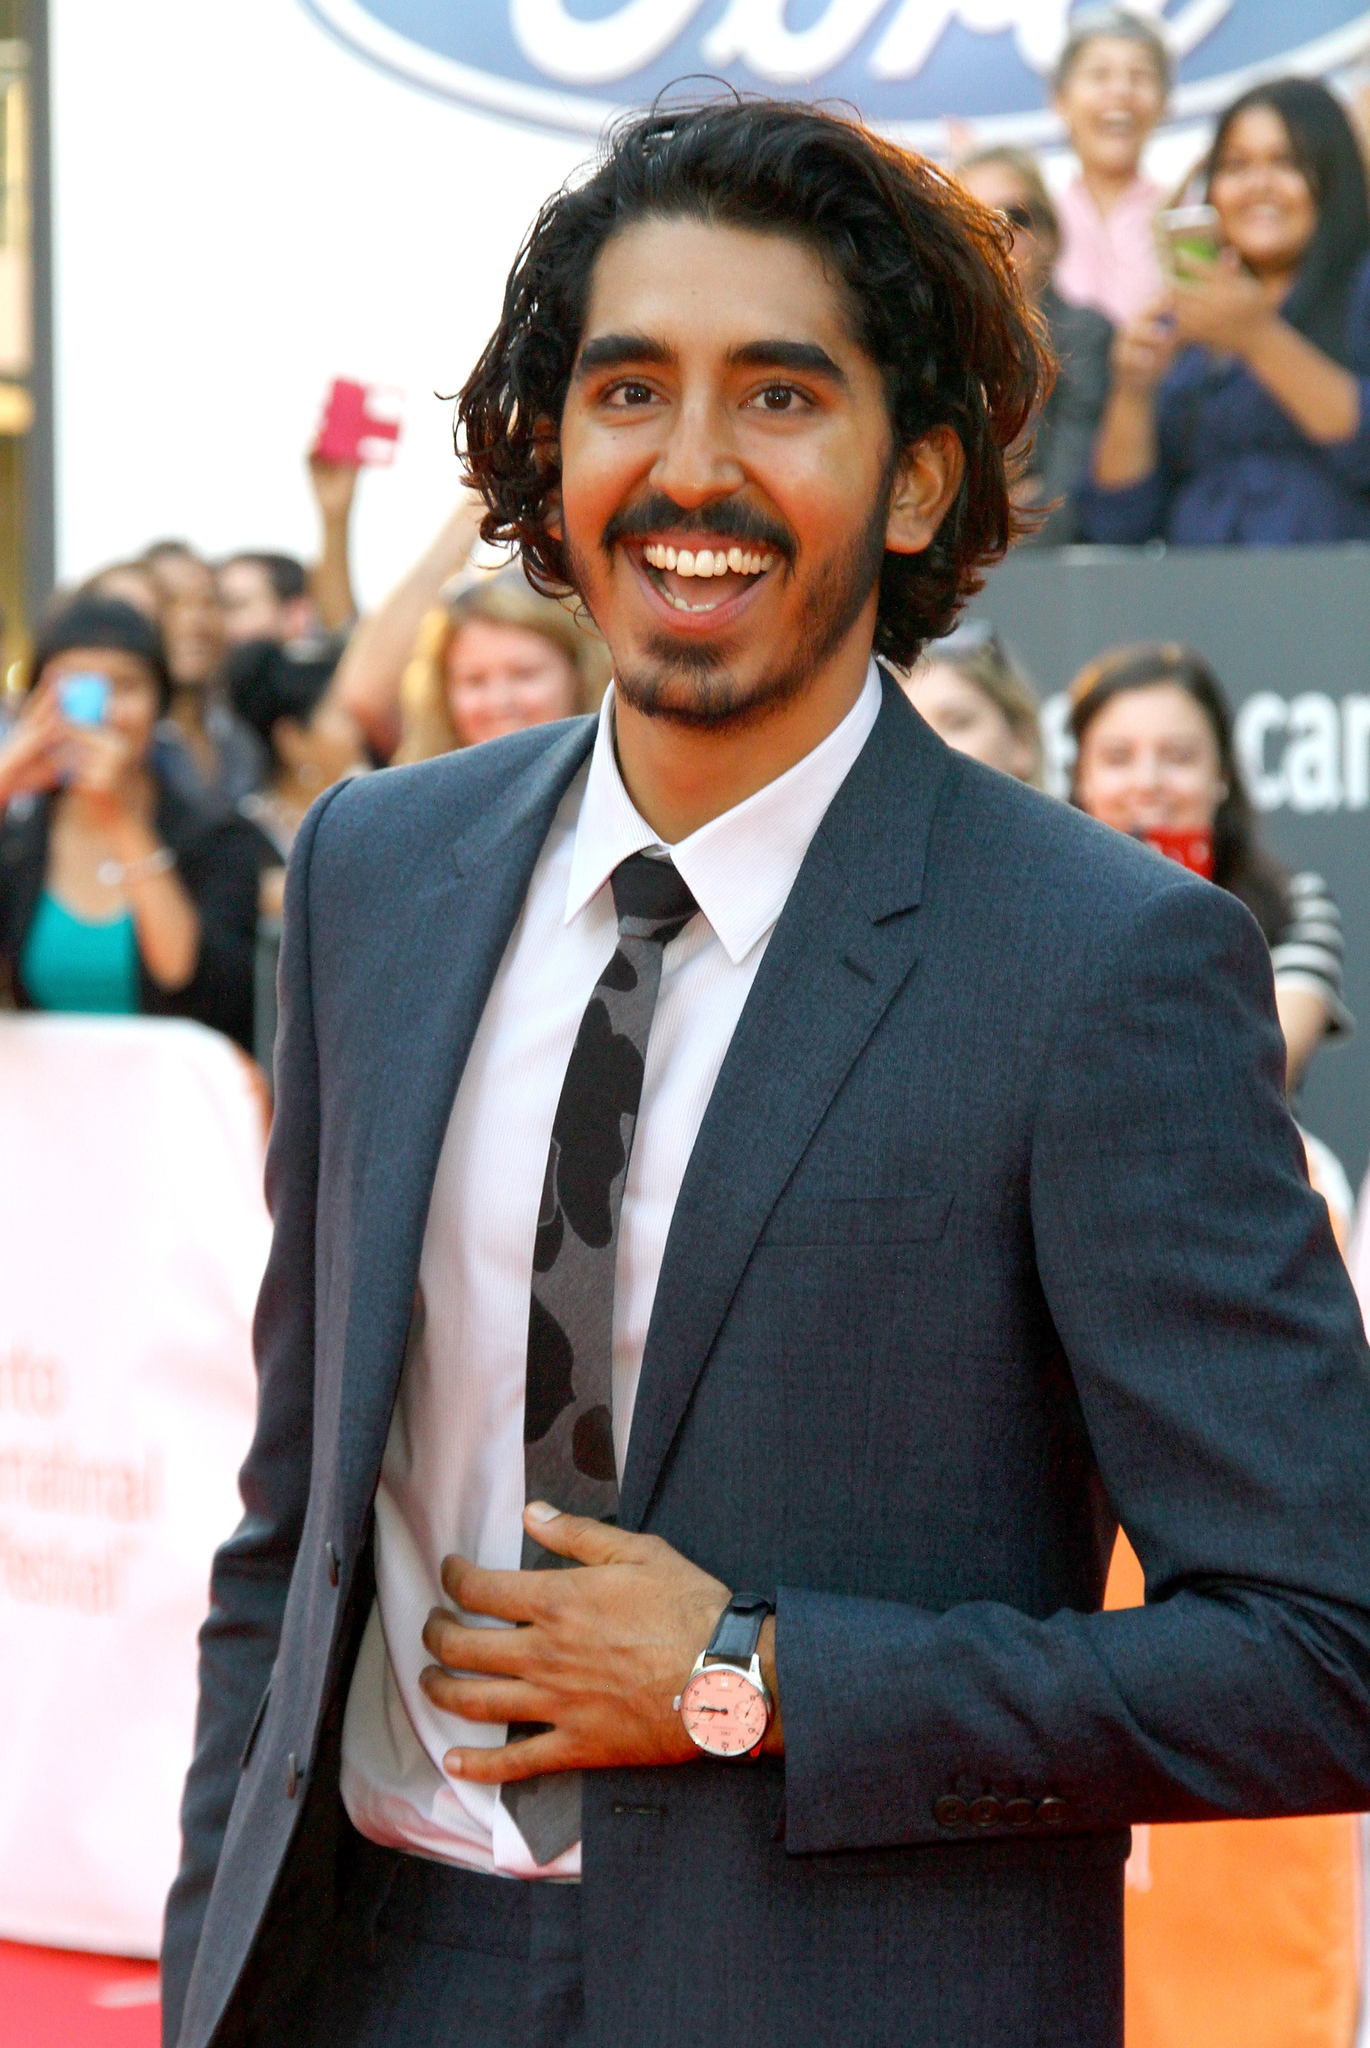 The The and Dev Patel at event of The Man Who Knew Infinity (2015)